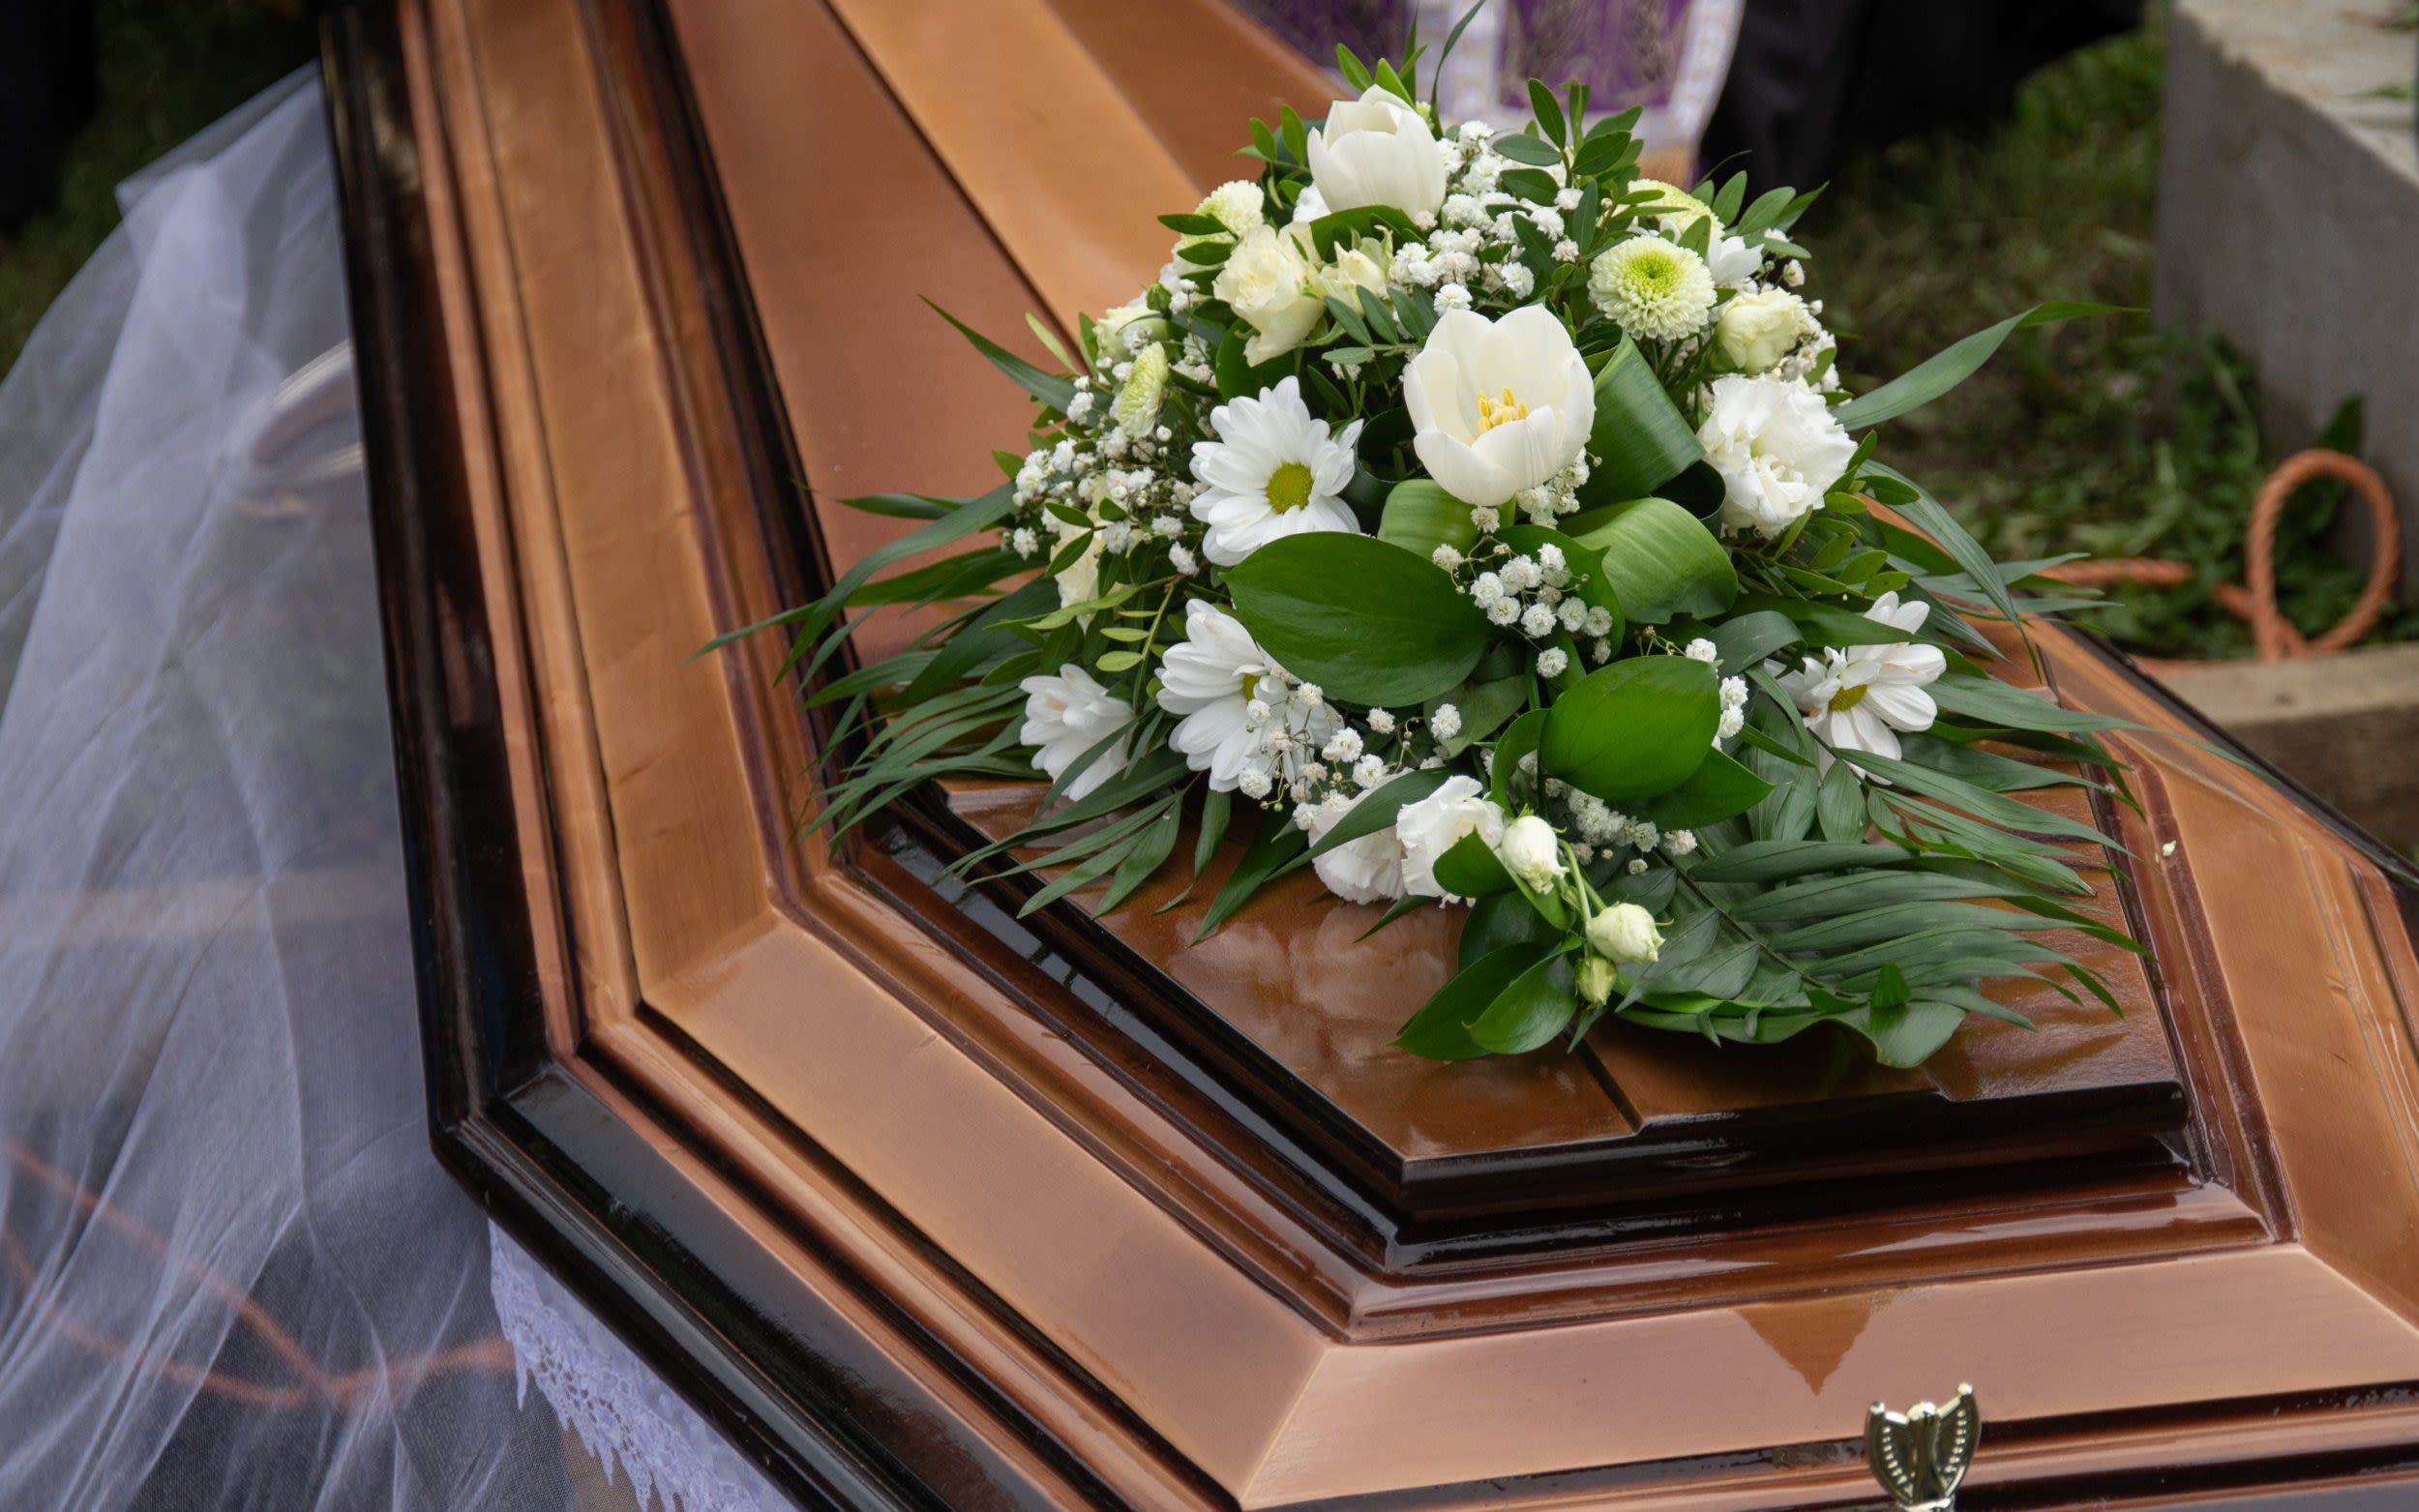 All funeral homes face spot checks after concern over mistreatment of the dead